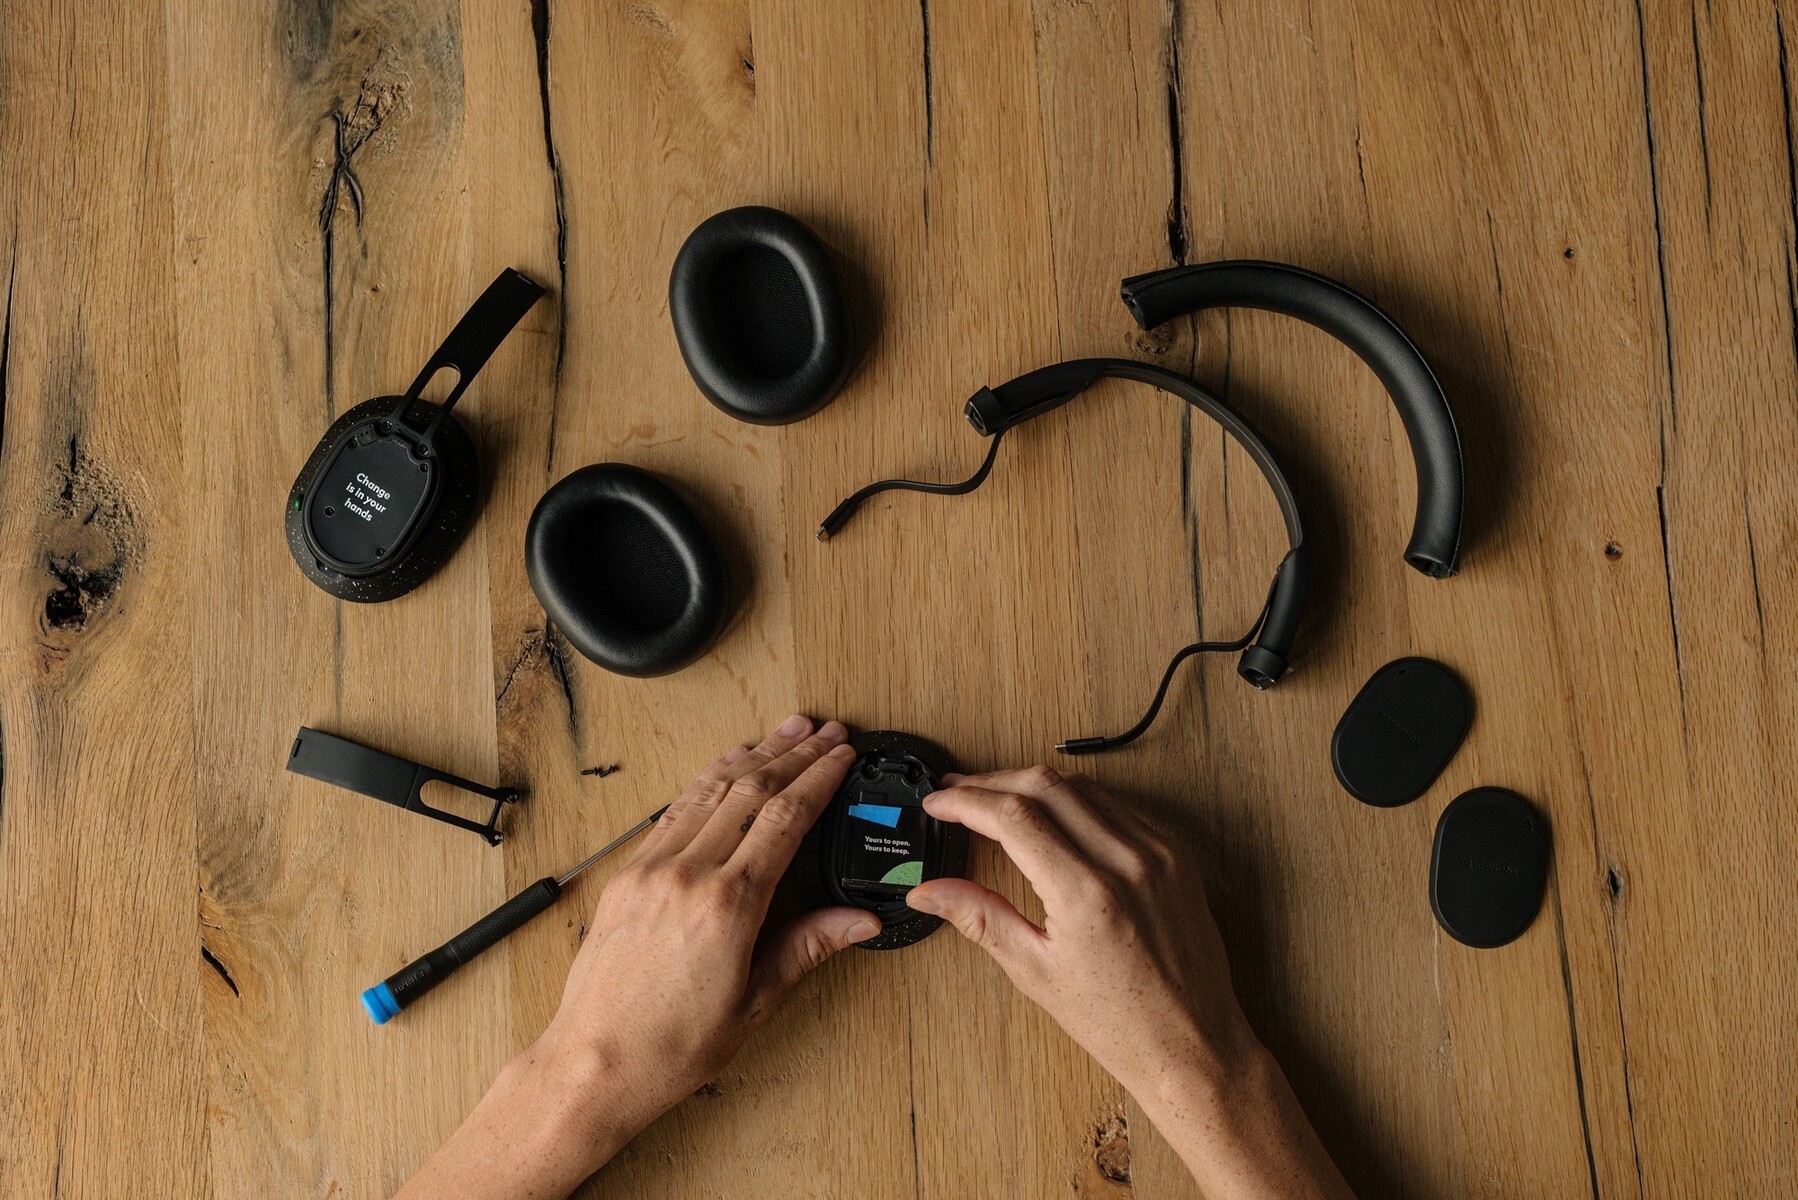 premium Fairbuds with NotebookCheck.net new over-ear features sustainable News XL headphones Fairphone as debuts -